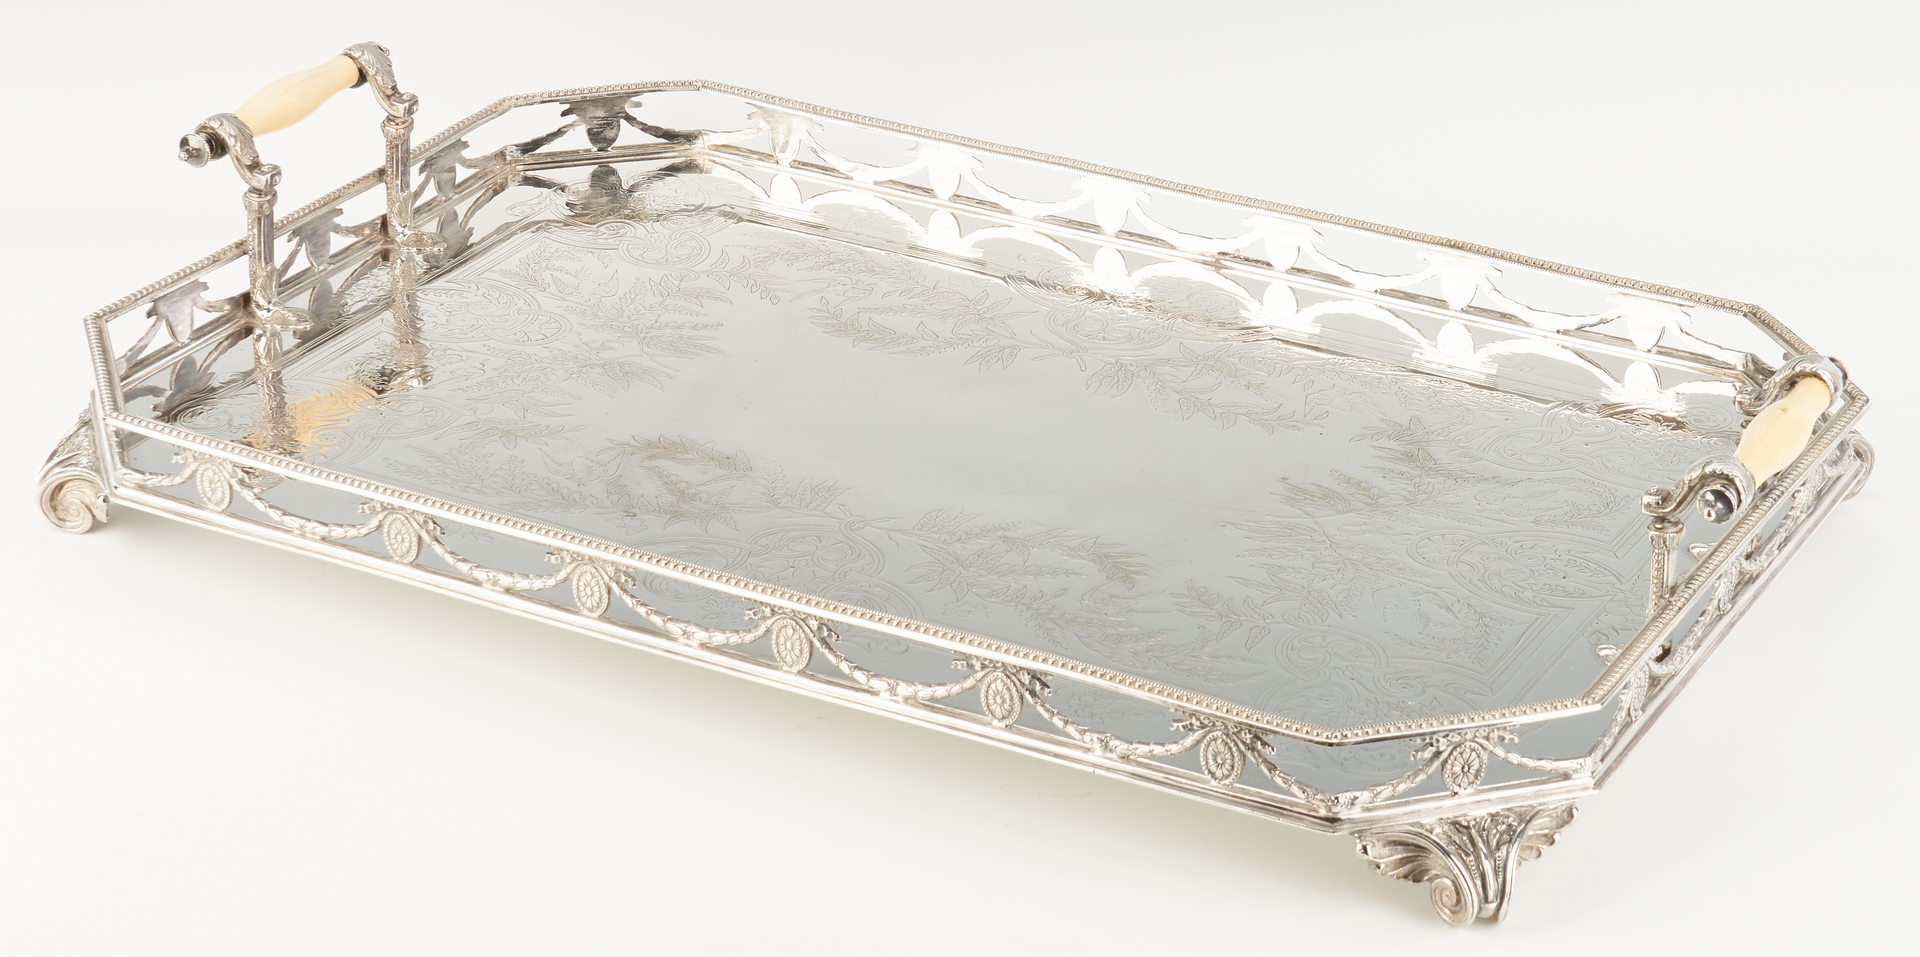 Lot 959: Neoclassical Silverplated Gallery Tray